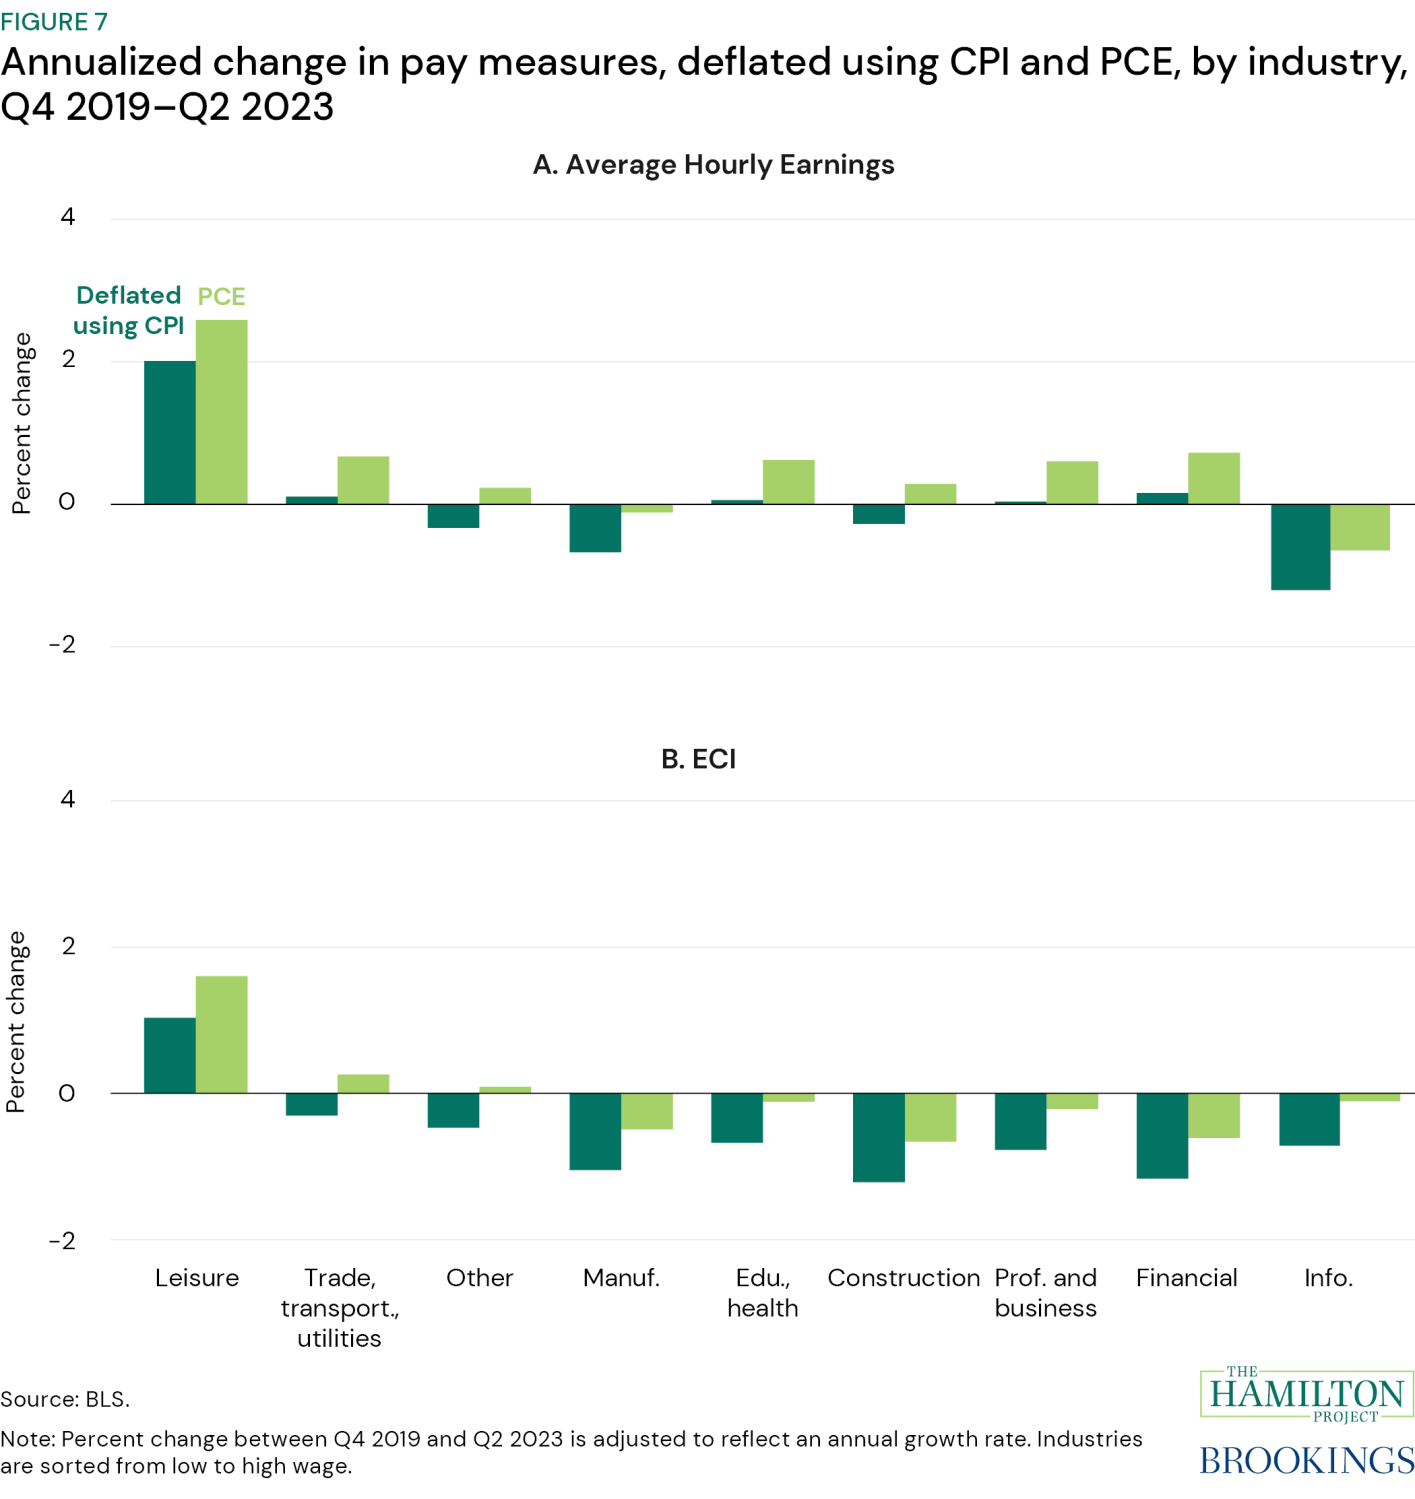 Figure 7: Annualized change in take-home pay measures, deflated using CPI and PCE, by industry, Q4 2019- Q2 2023